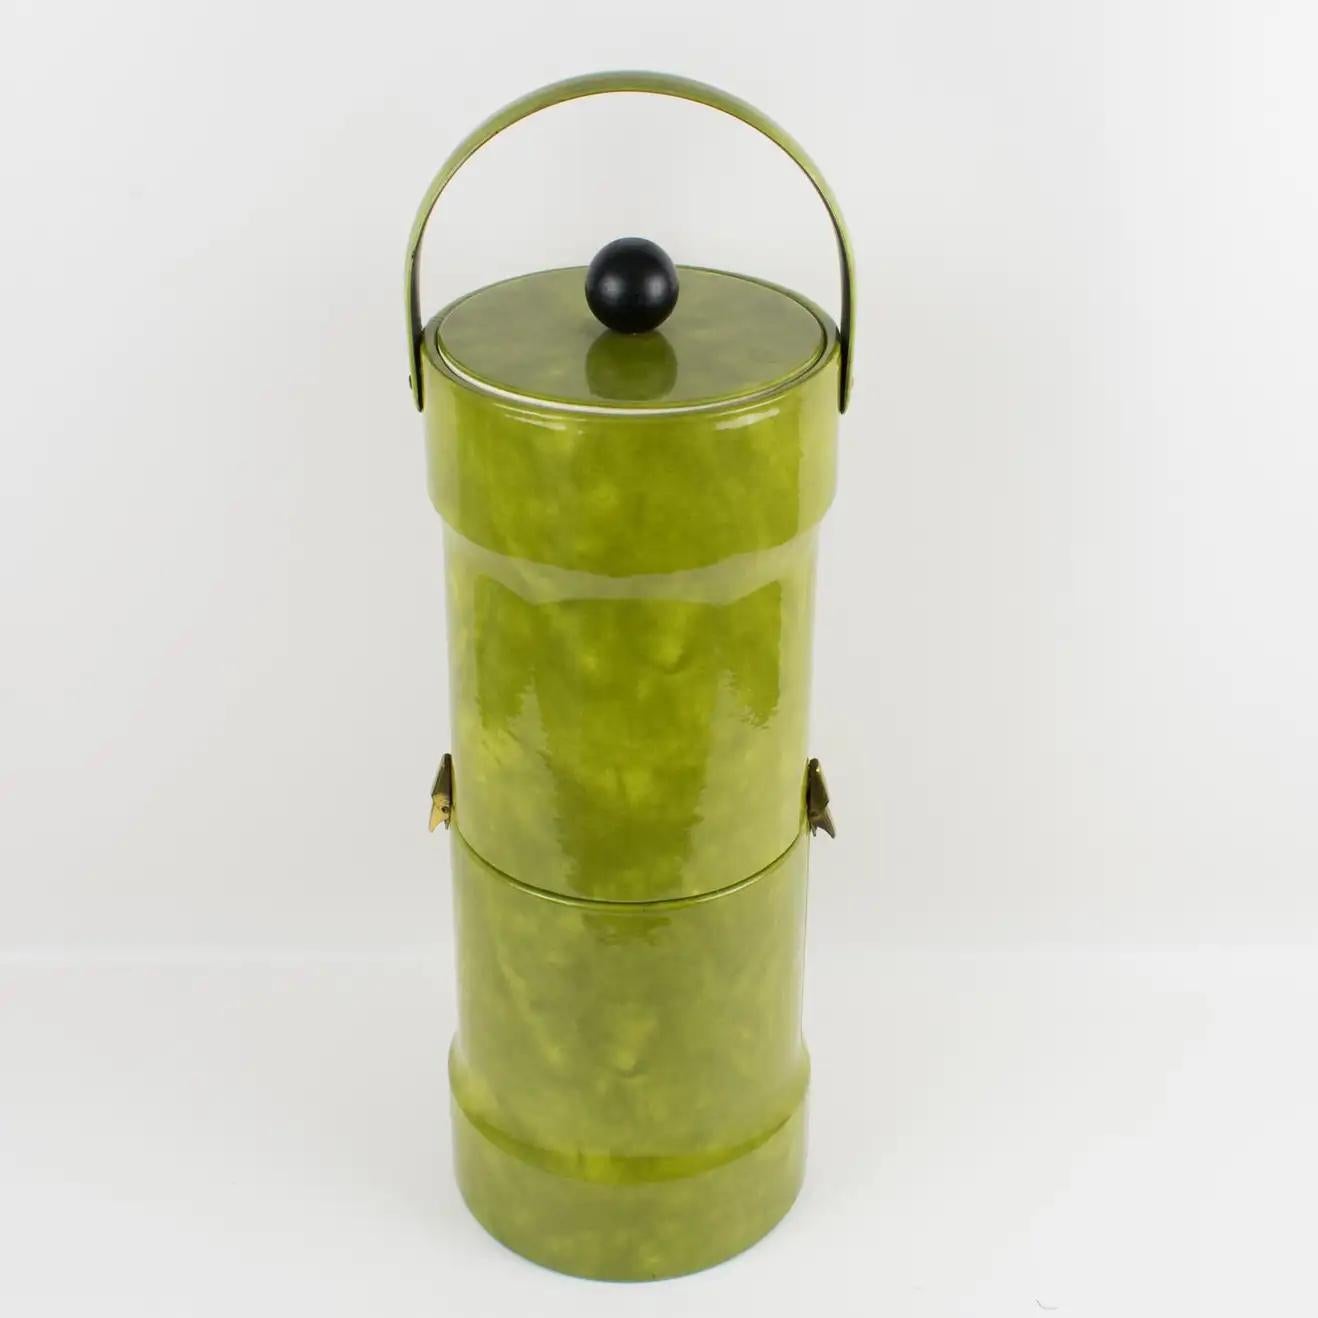 This stunning Mid-Century Modern barware accessory double-decker ice bucket is made of luminous green PVC leather Vinyl. The extra tall cylindric-shaped body opens in two sections with a lid and one handle on the top. Hinges attach the lower section